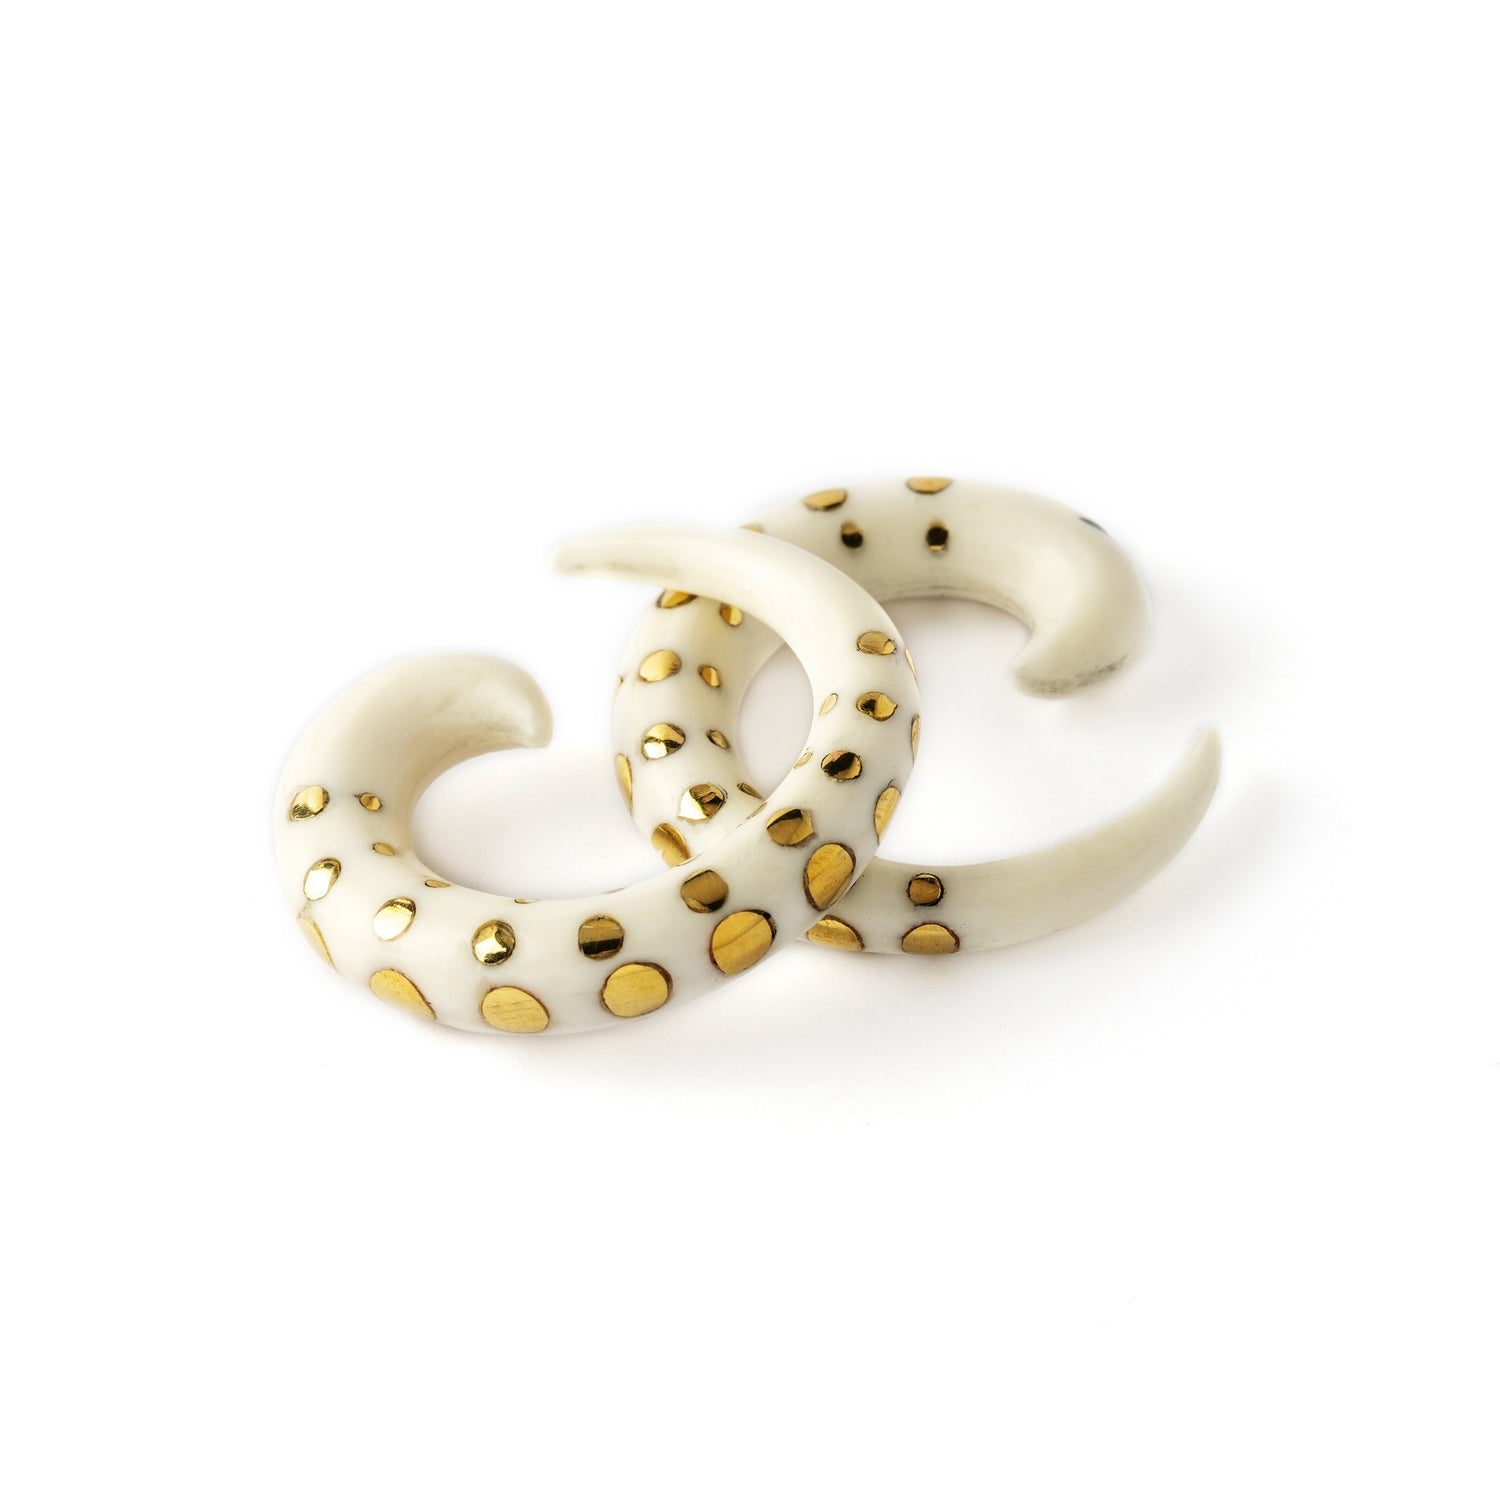 pair of white bone taper ear stretchers with golden dots